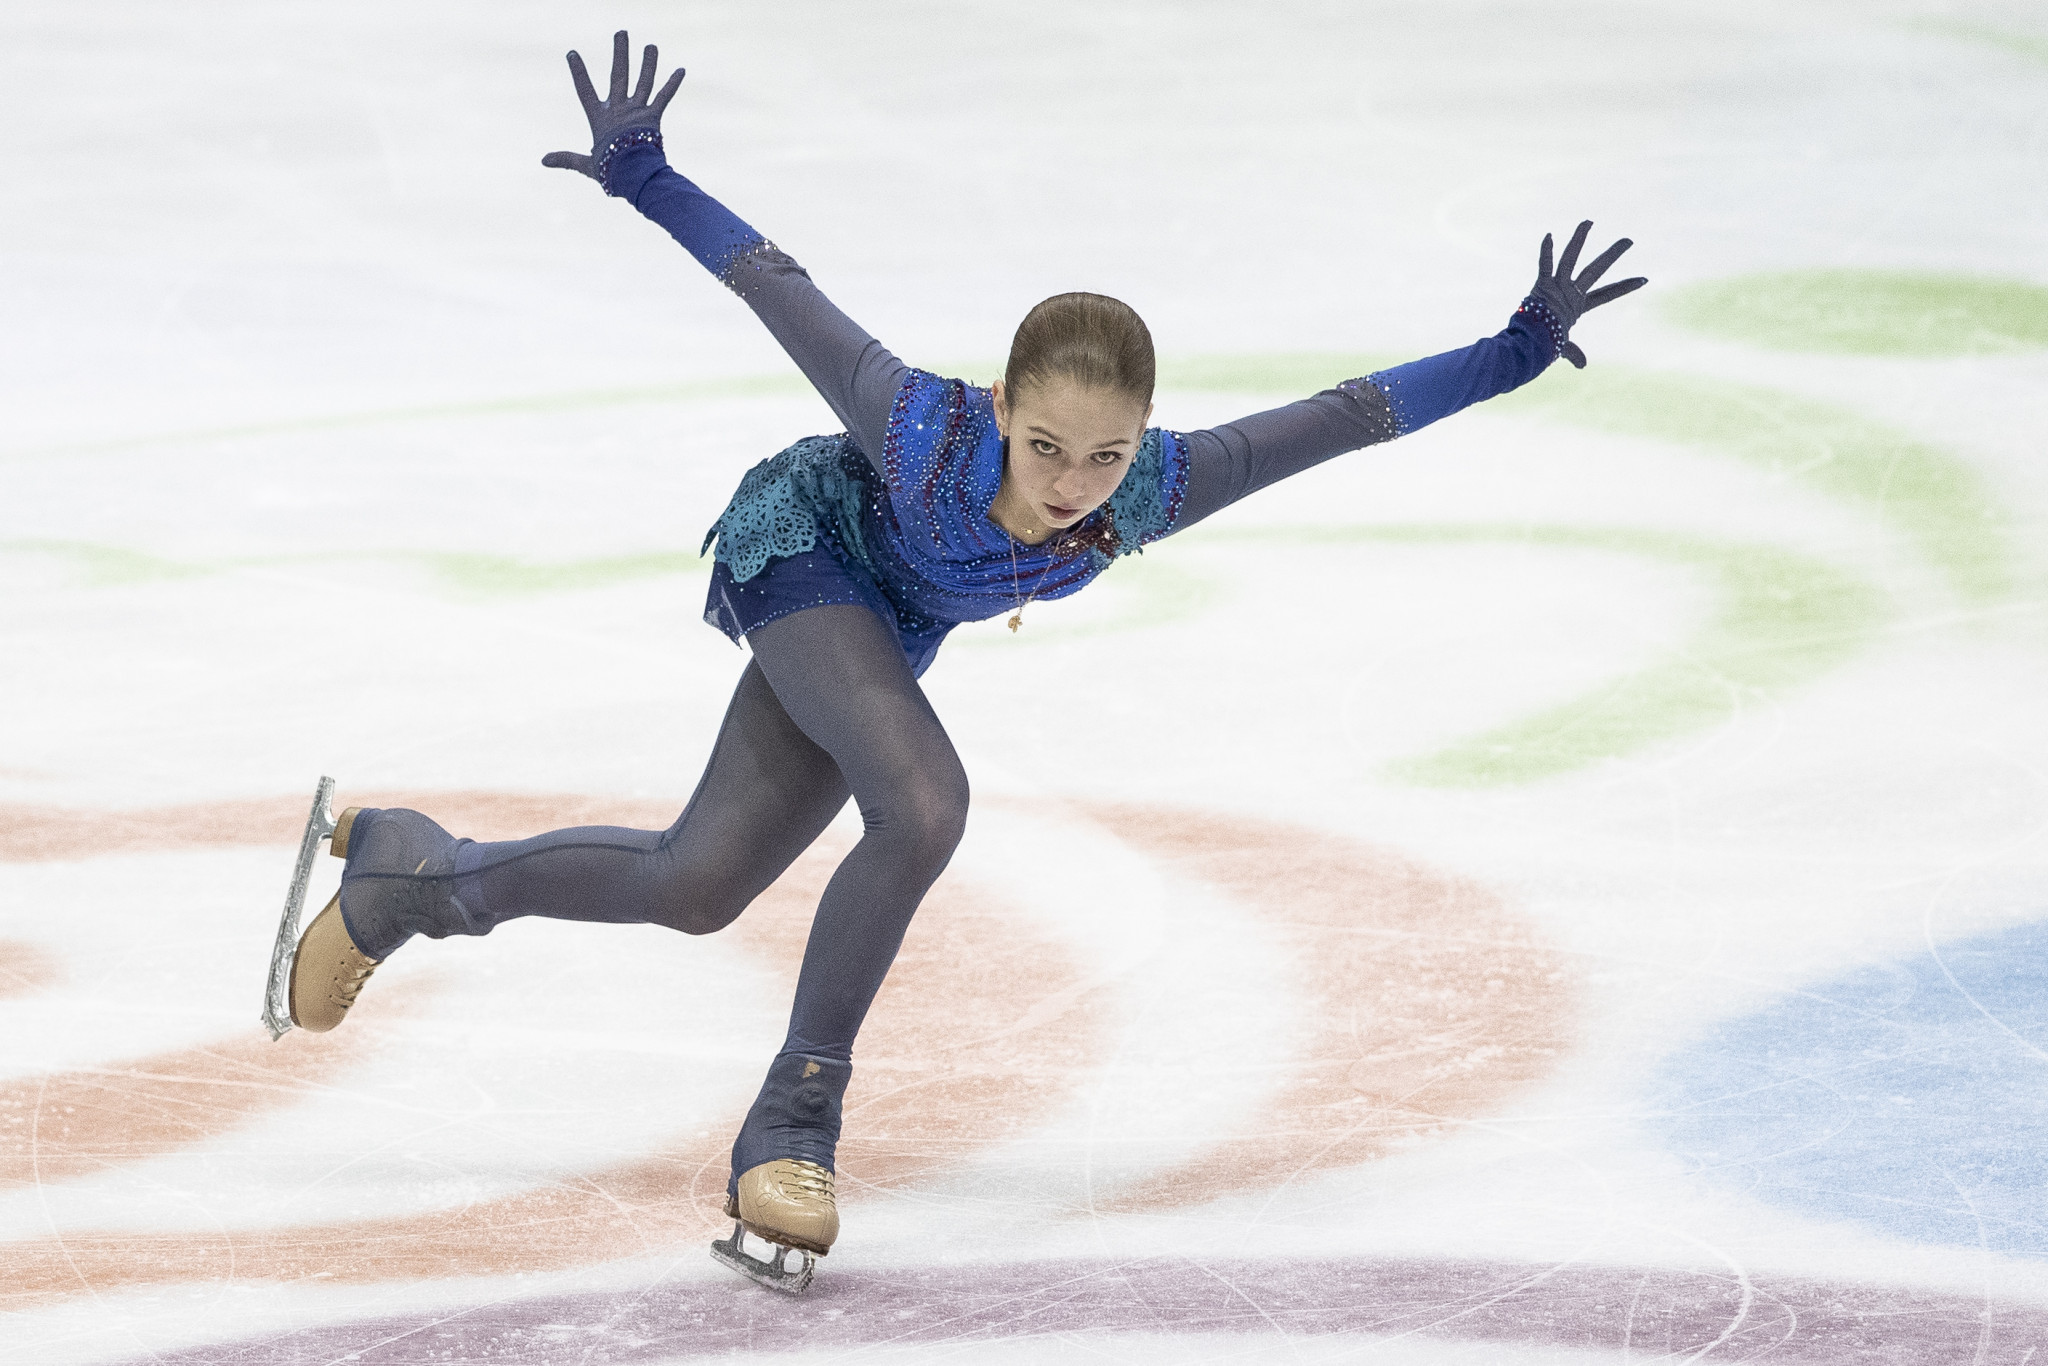 Figure skating star Alexandra Trusova has successfully landed a quadruple Rittberger jump in training, according to her coach ©Getty Images